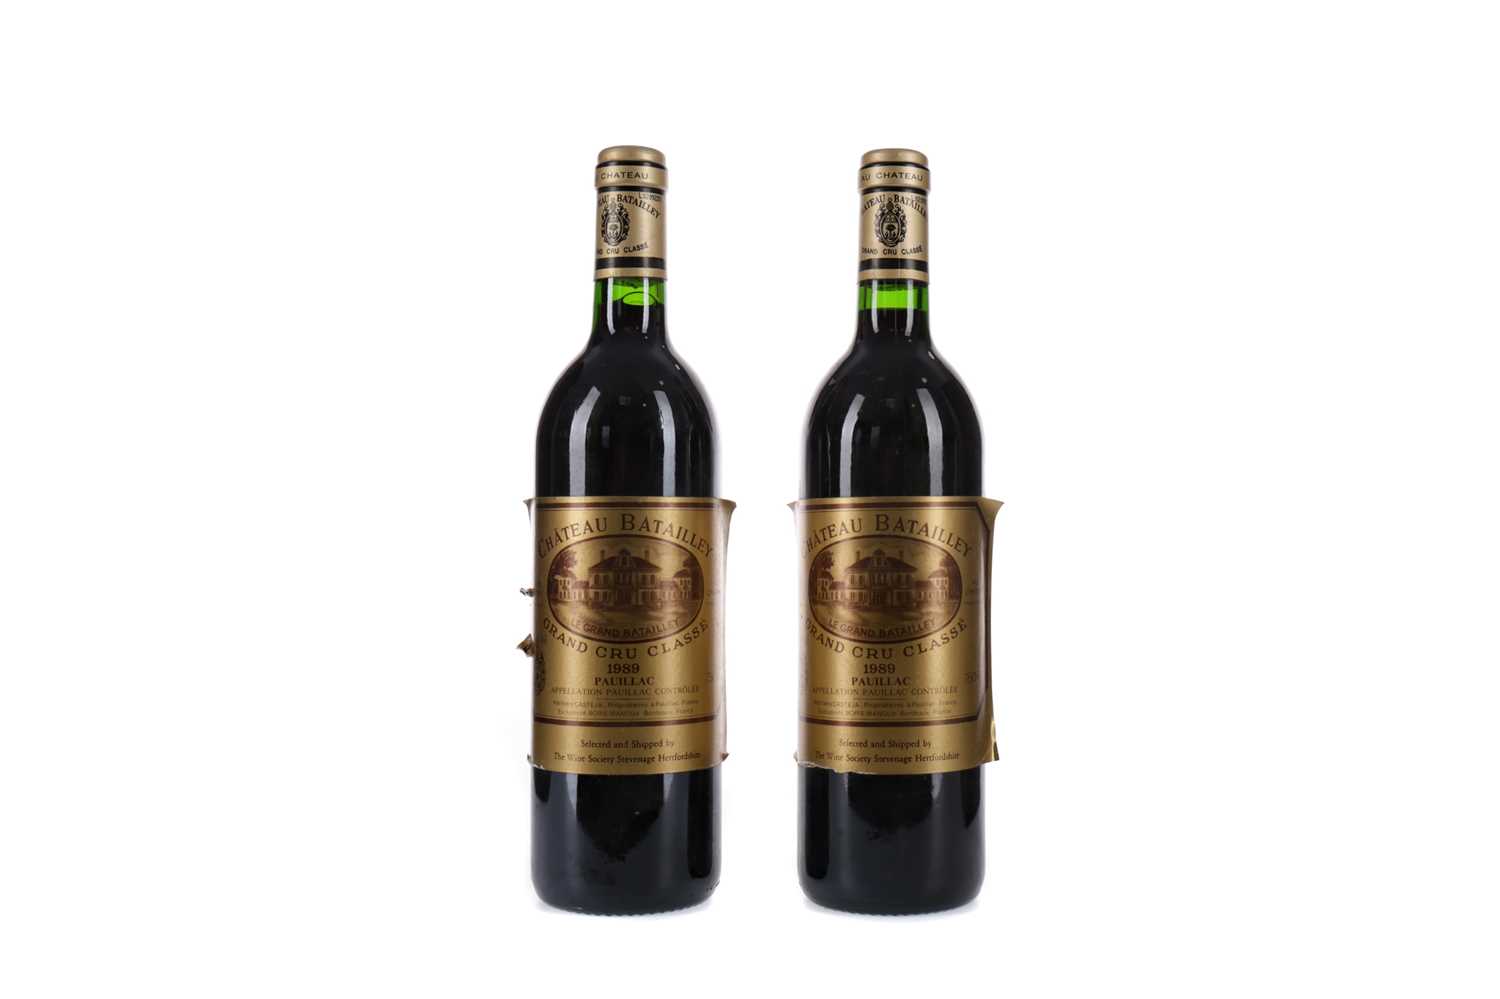 Lot 51 - TWO BOTTLES OF CHATEAU BATAILLEY 1989